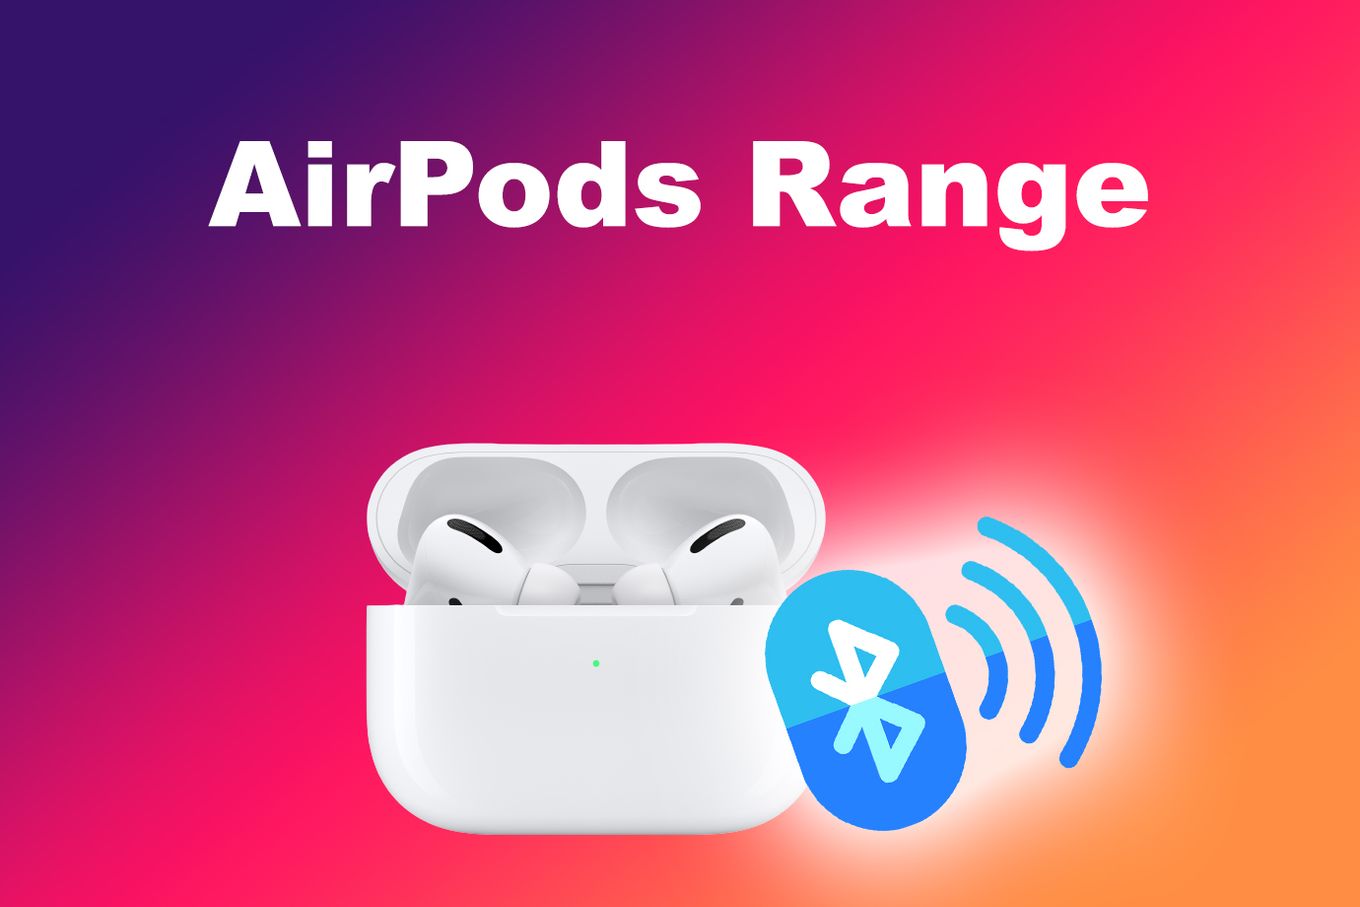 What is Airpods Range?